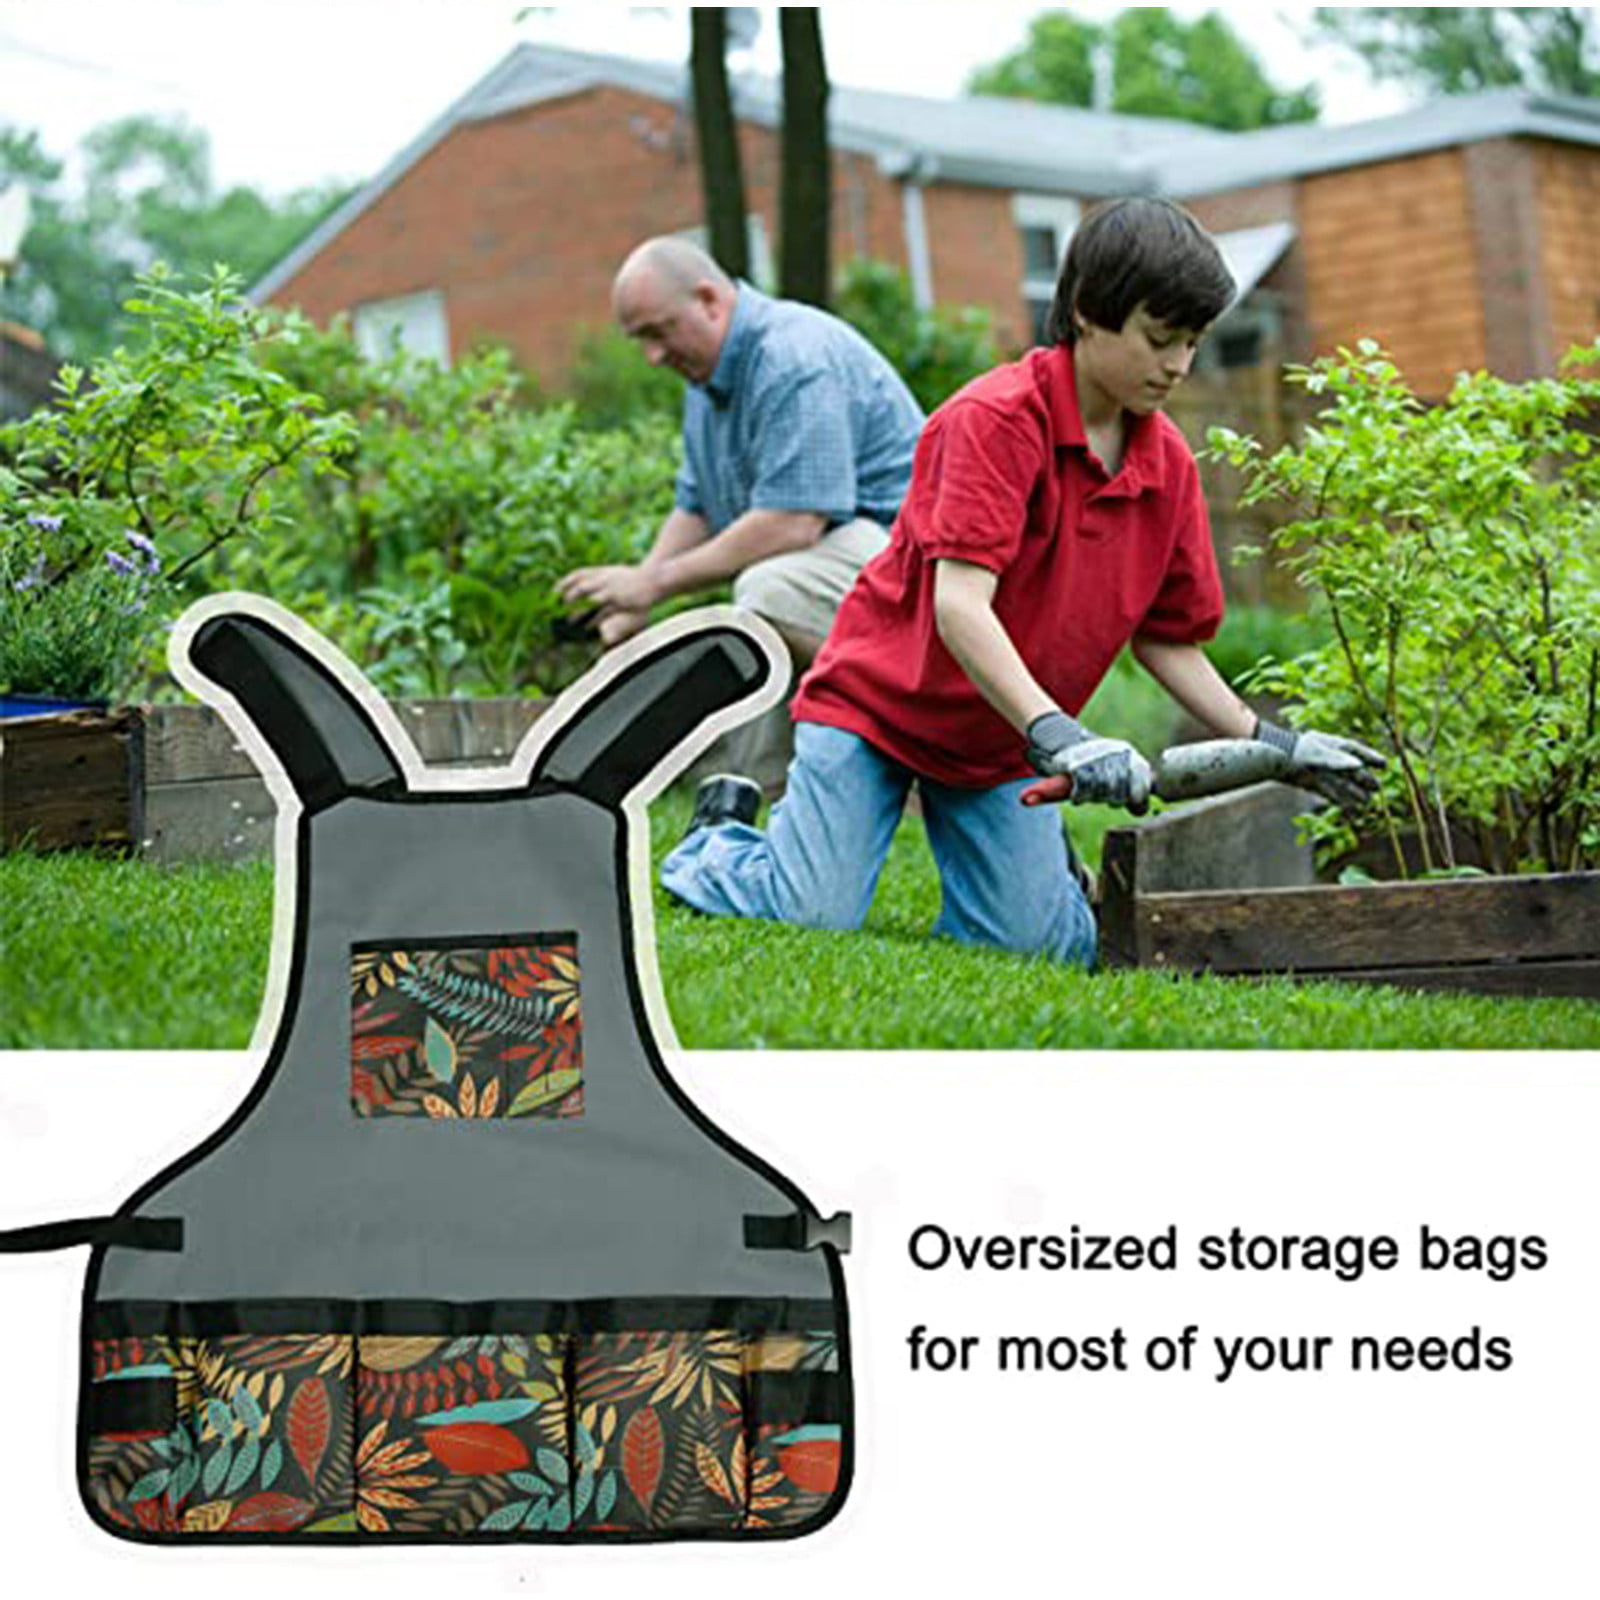 wawabox Waterproof Oxford Cloth Gardening Apron Thickening Wear-resistant Work Apron for Gardening Carpentry Lawn Care